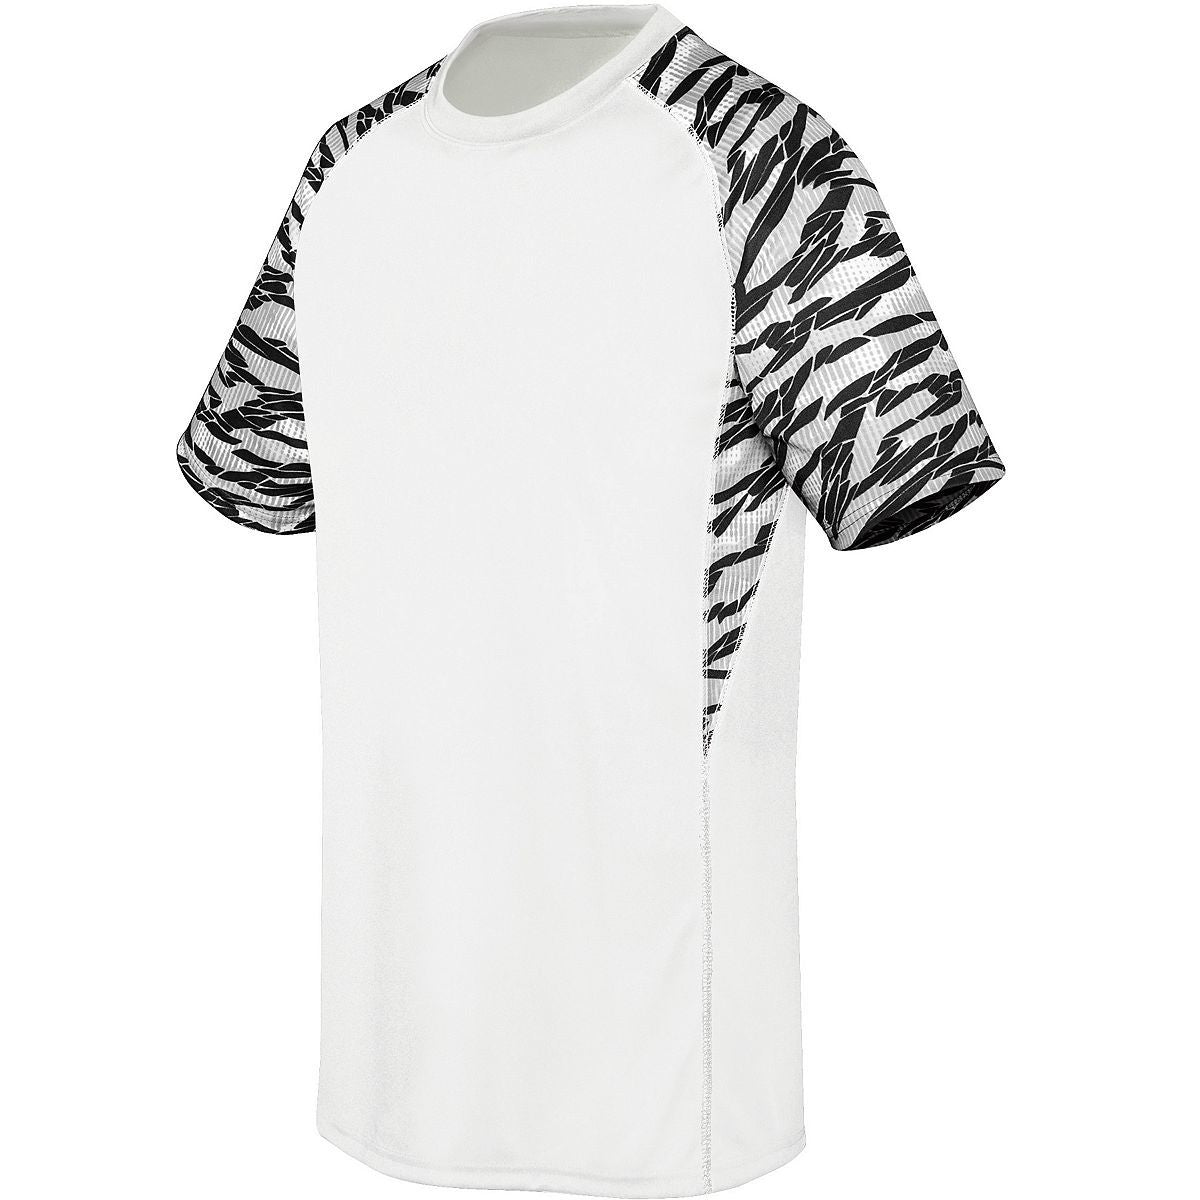 High 5 Evolution Printed Short Sleeve Jersey in White/Fragment Print/White  -Part of the Adult, Adult-Jersey, High5-Products, Shirts product lines at KanaleyCreations.com